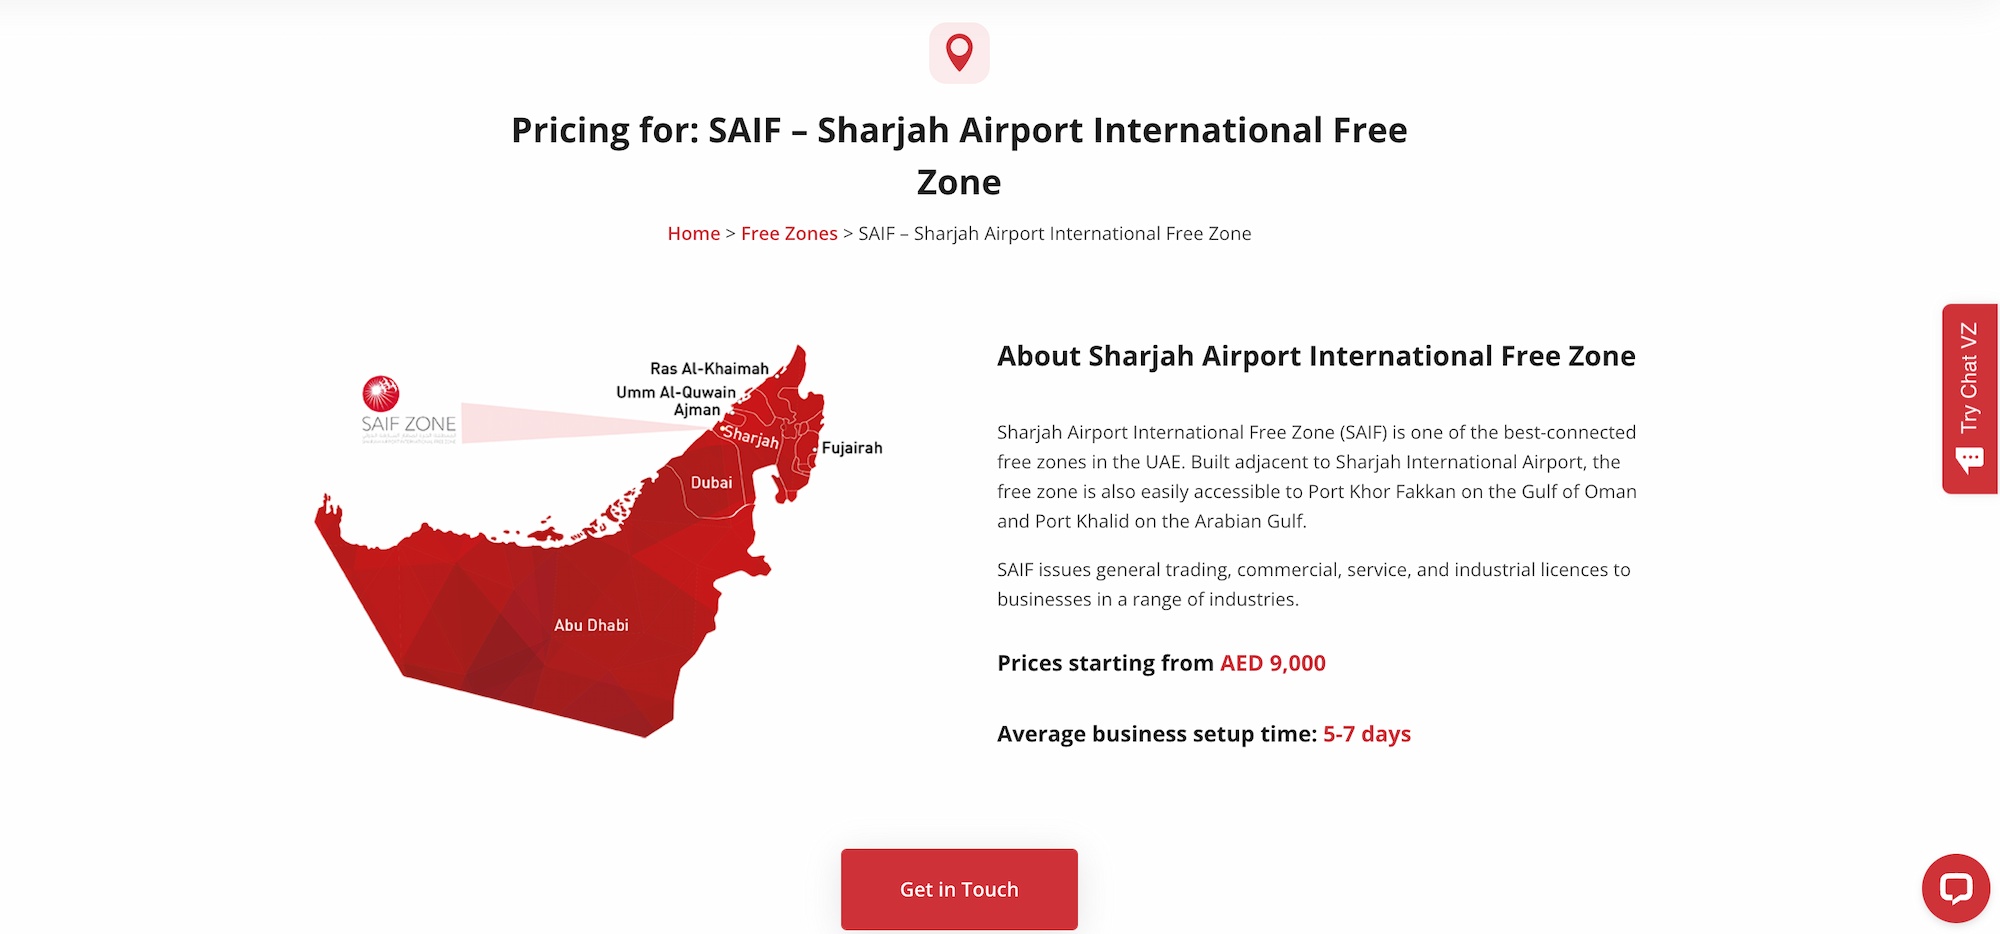 An overview and pricing information of the SAIF Free Zone.